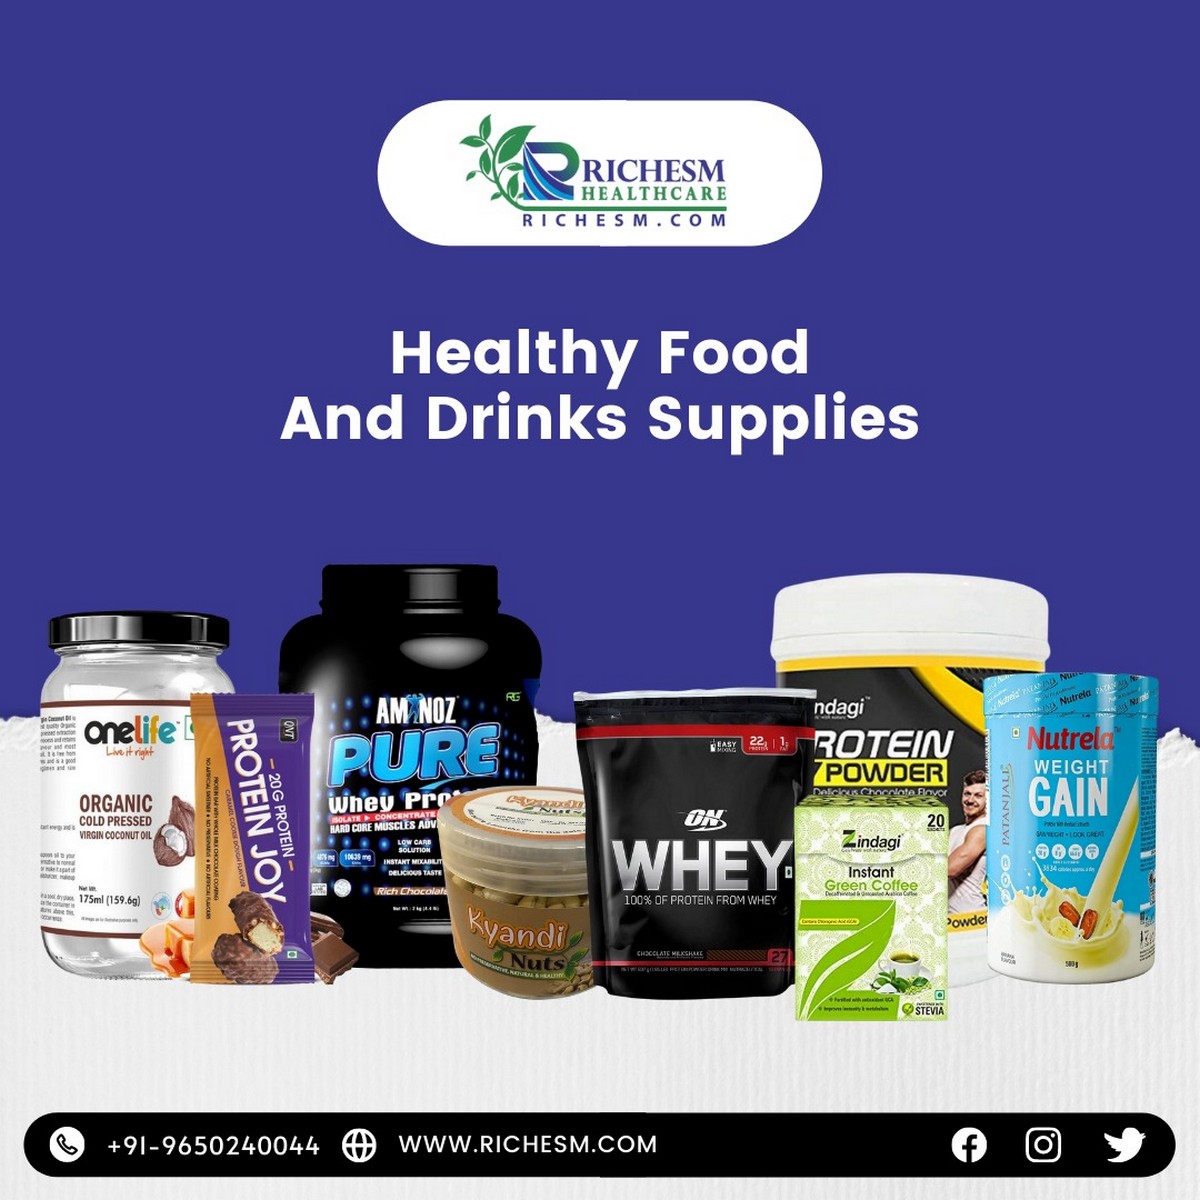 Healthy Food And Drinks Supplies Health and Nutrition Healthy Food And Drinks